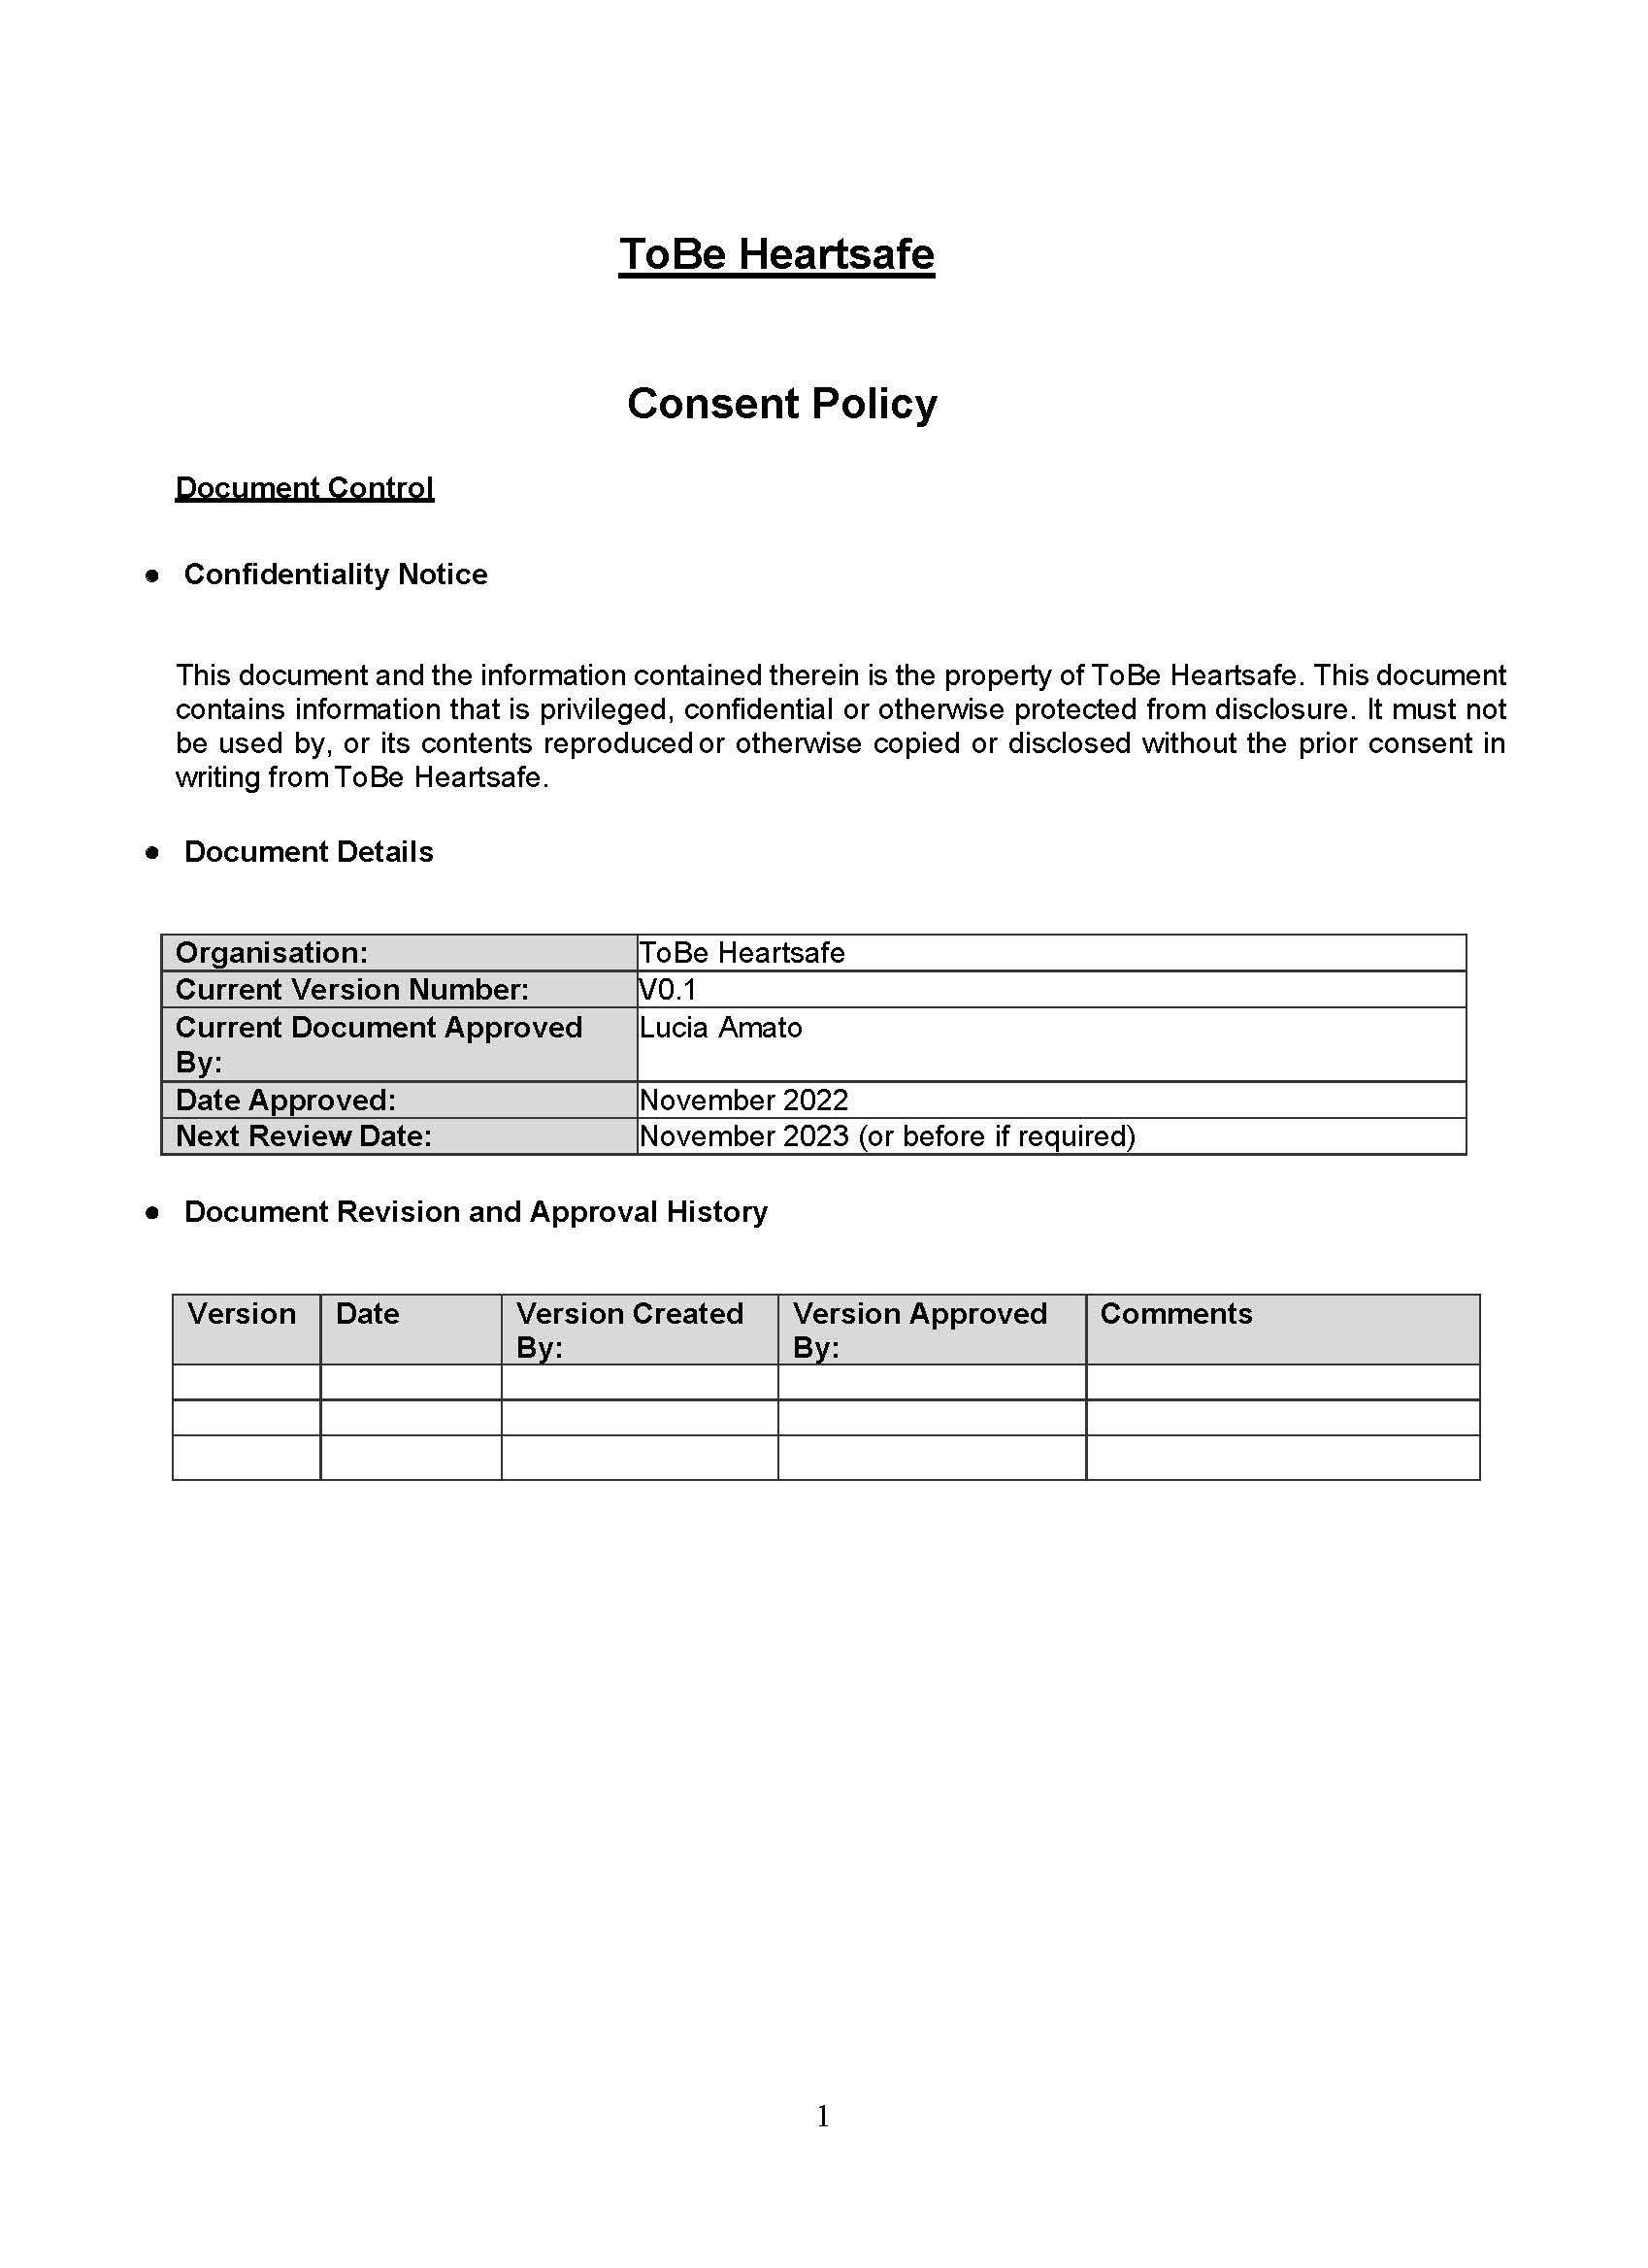 ToBe-Consent Policy V0.1[5041]_Page_1